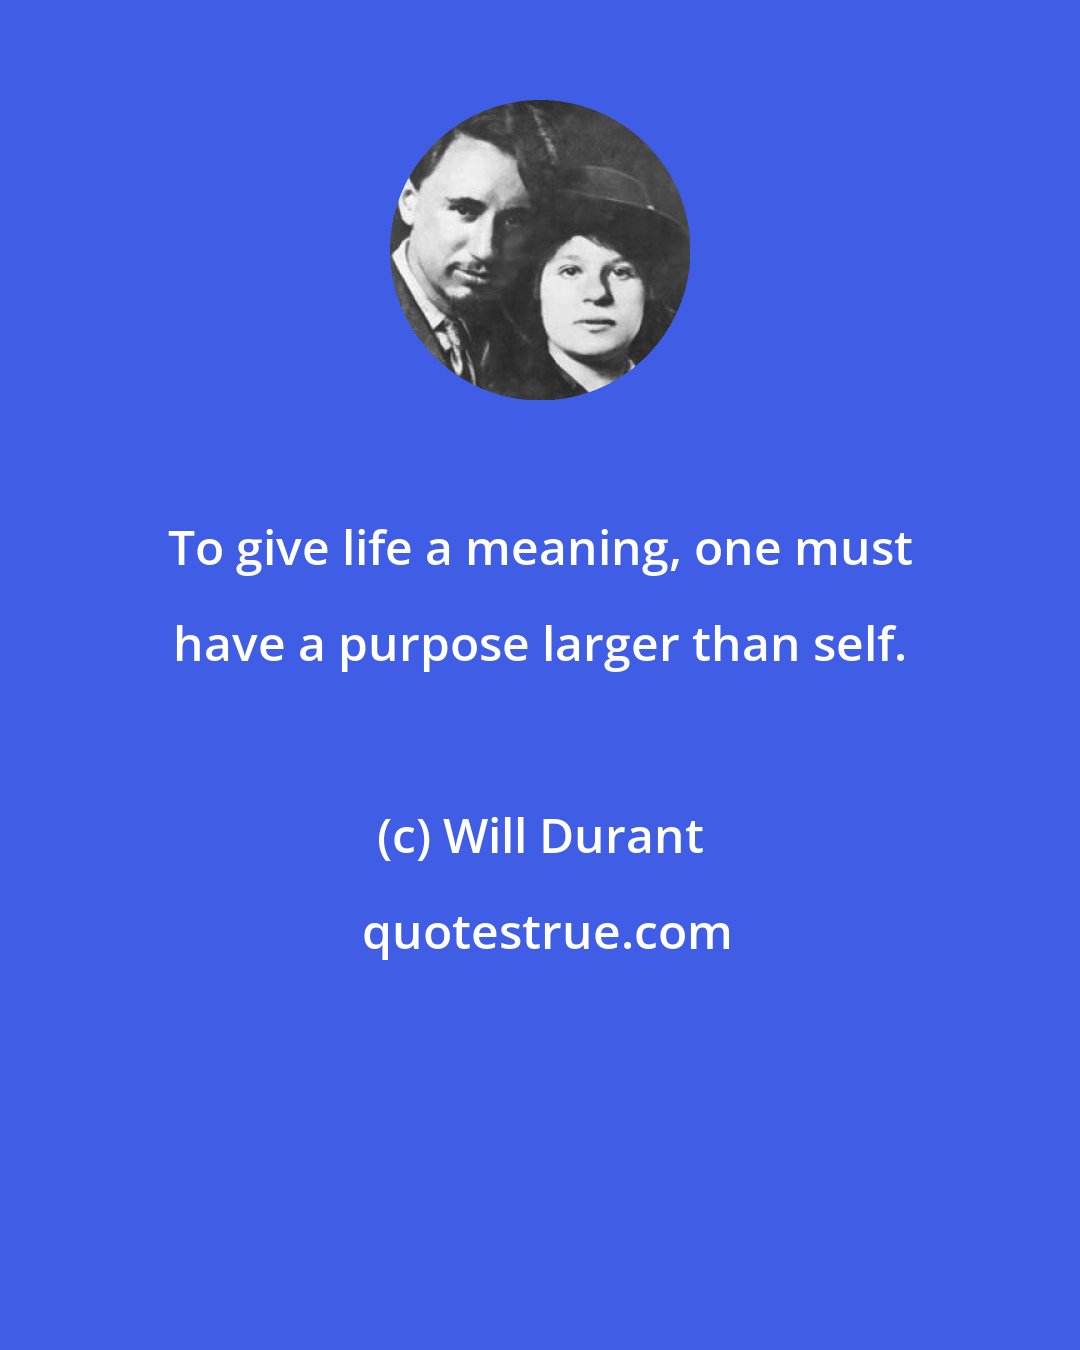 Will Durant: To give life a meaning, one must have a purpose larger than self.